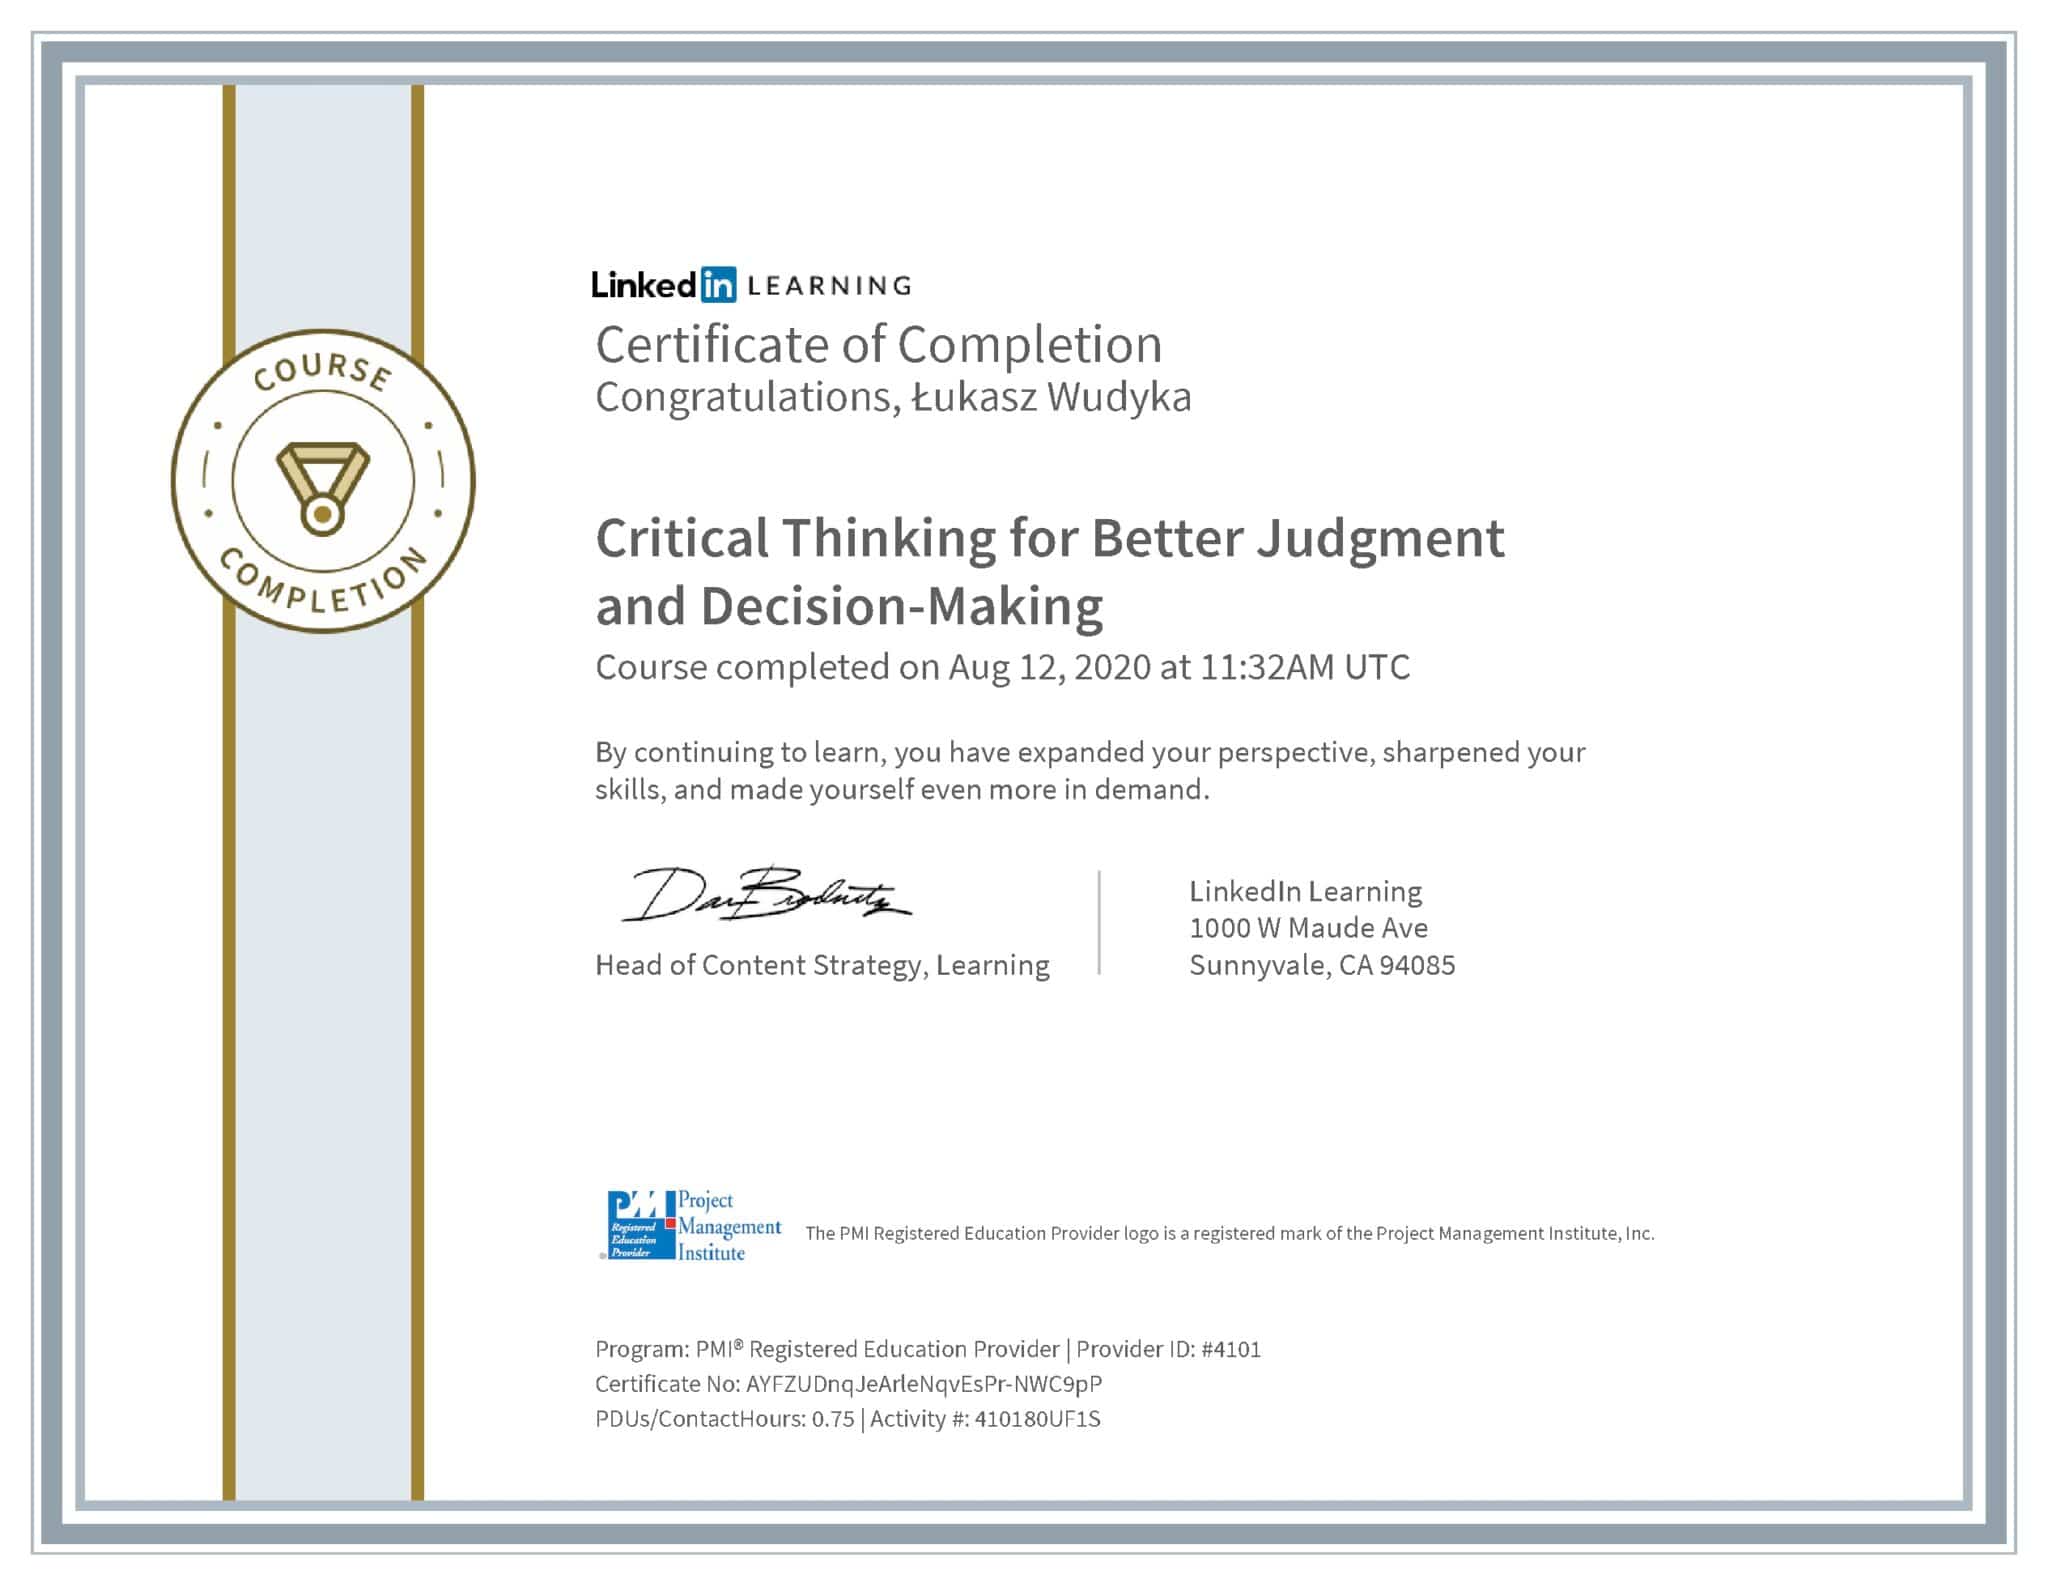 Łukasz Wudyka certyfikat LinkedIn Critical Thinking for Better Judgment and Decision-Making PMI